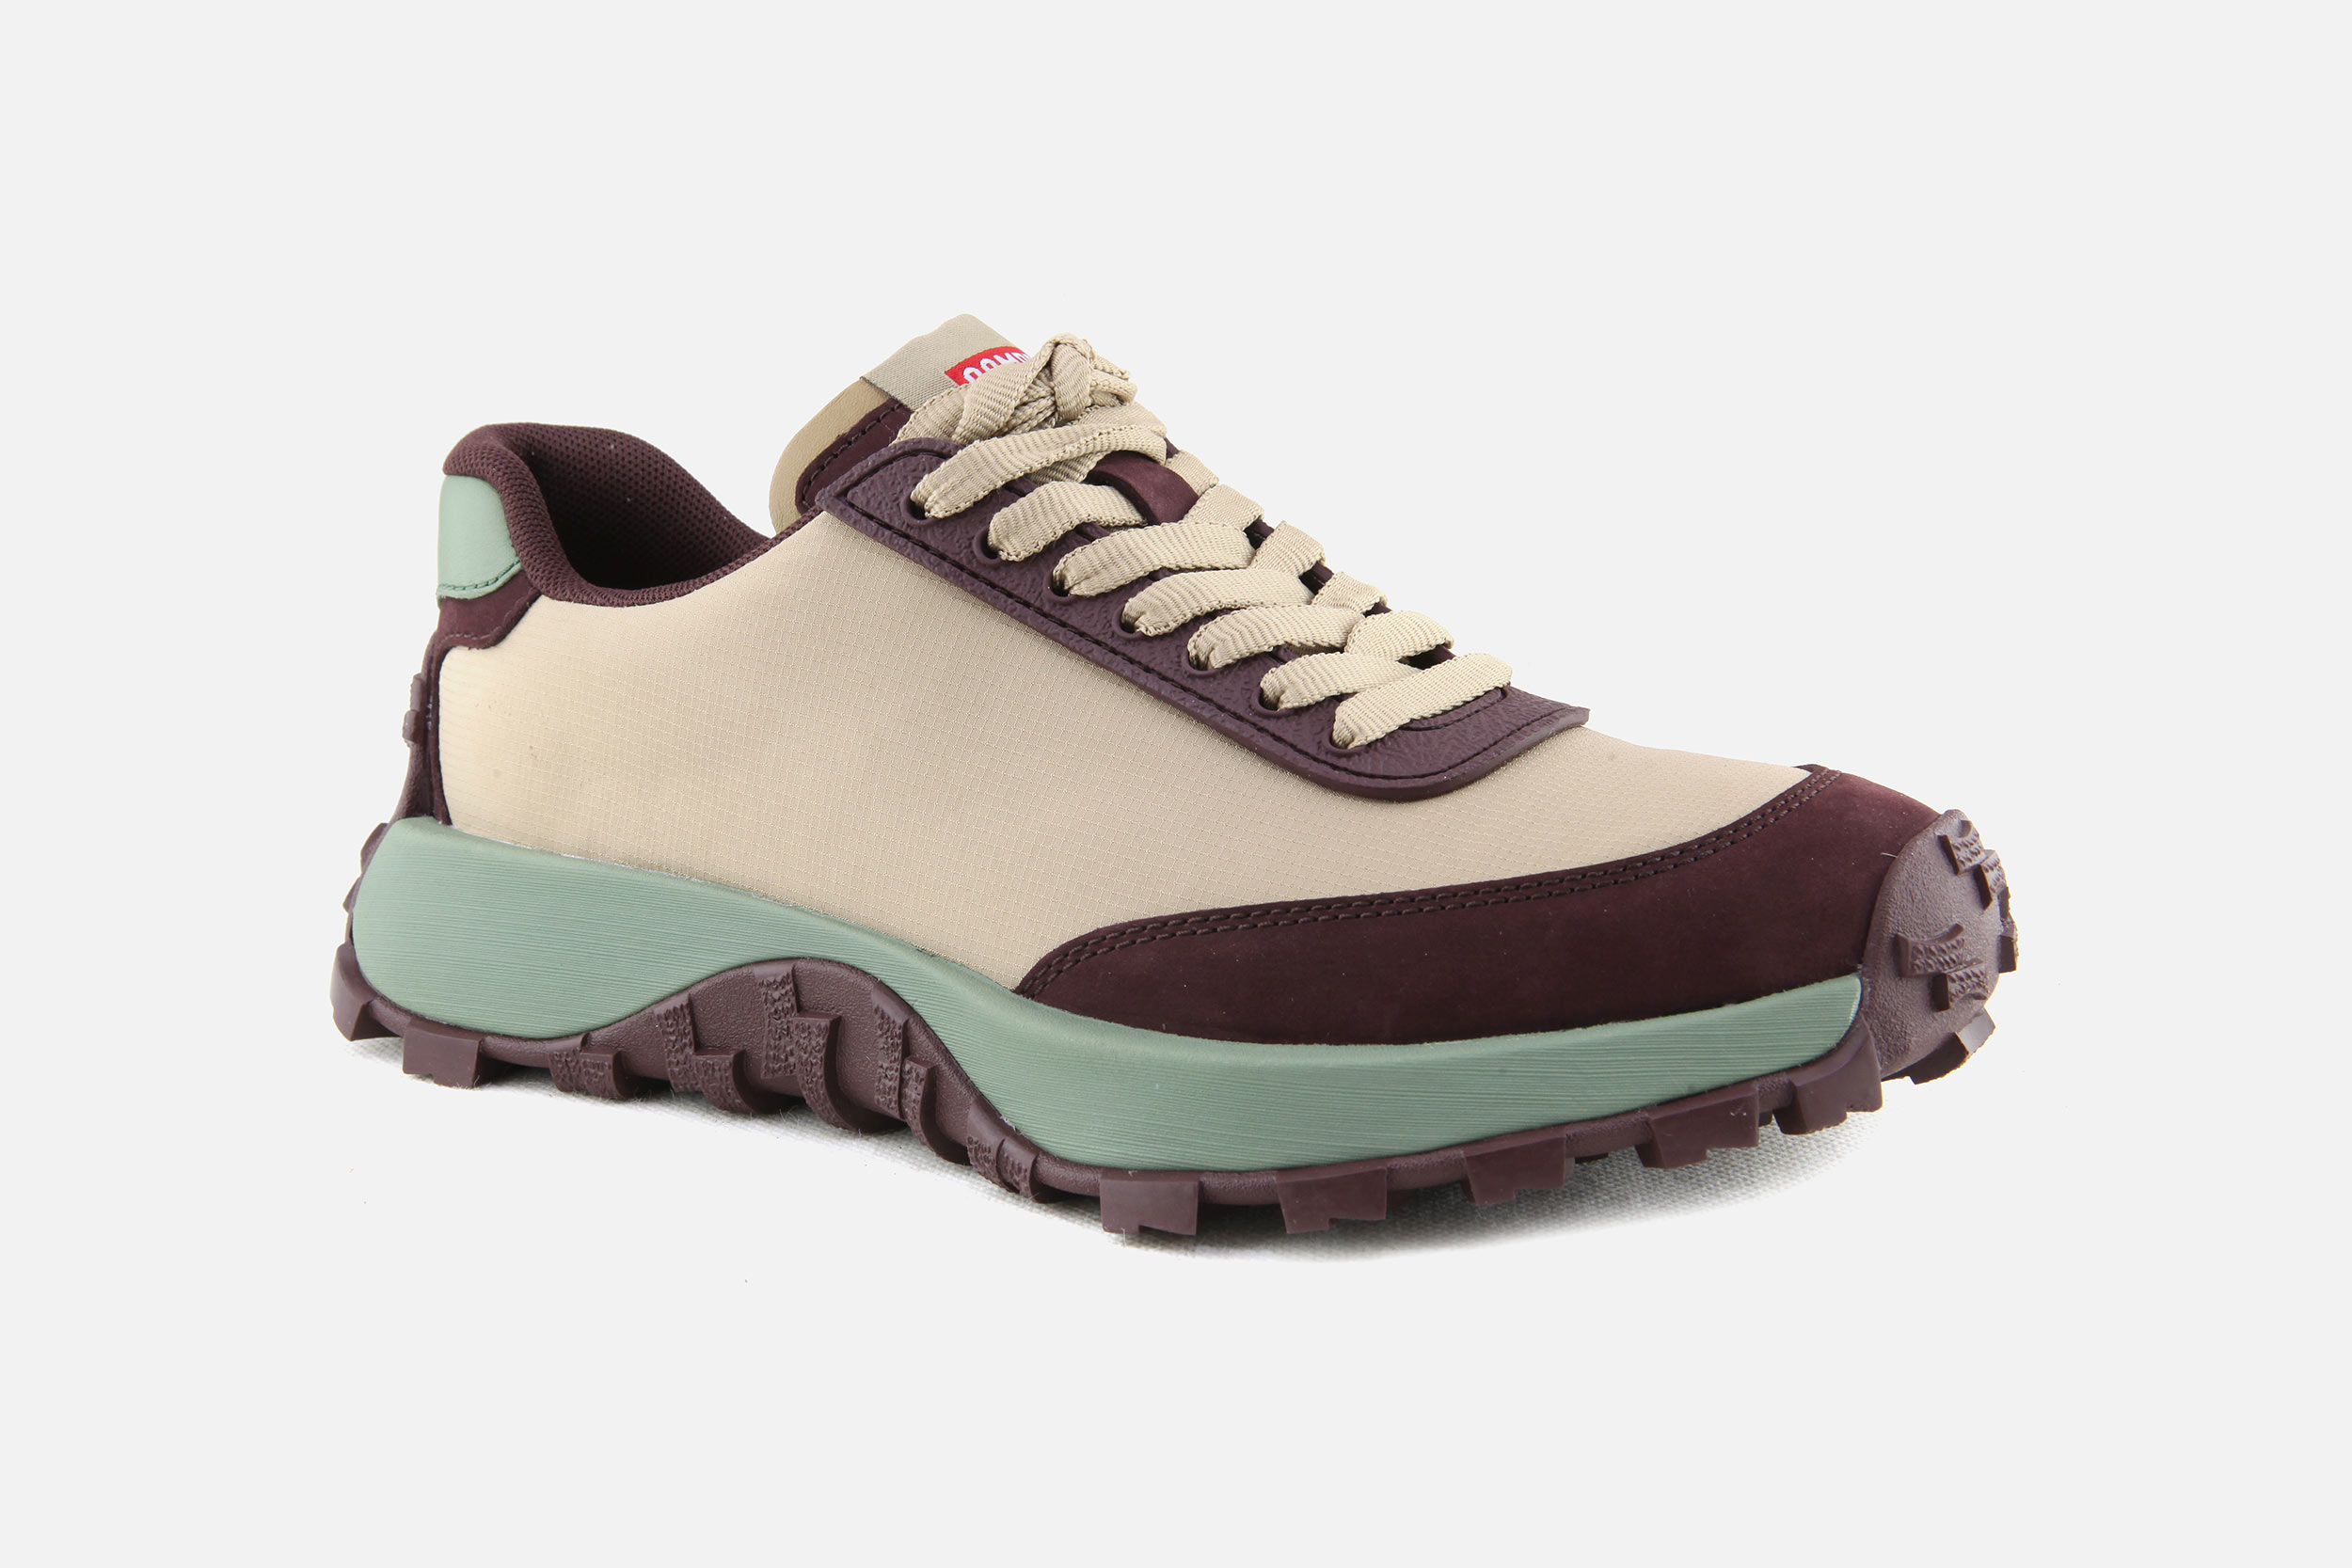 Camper Drift Trail sneakers in recycled fabric and recycled leather